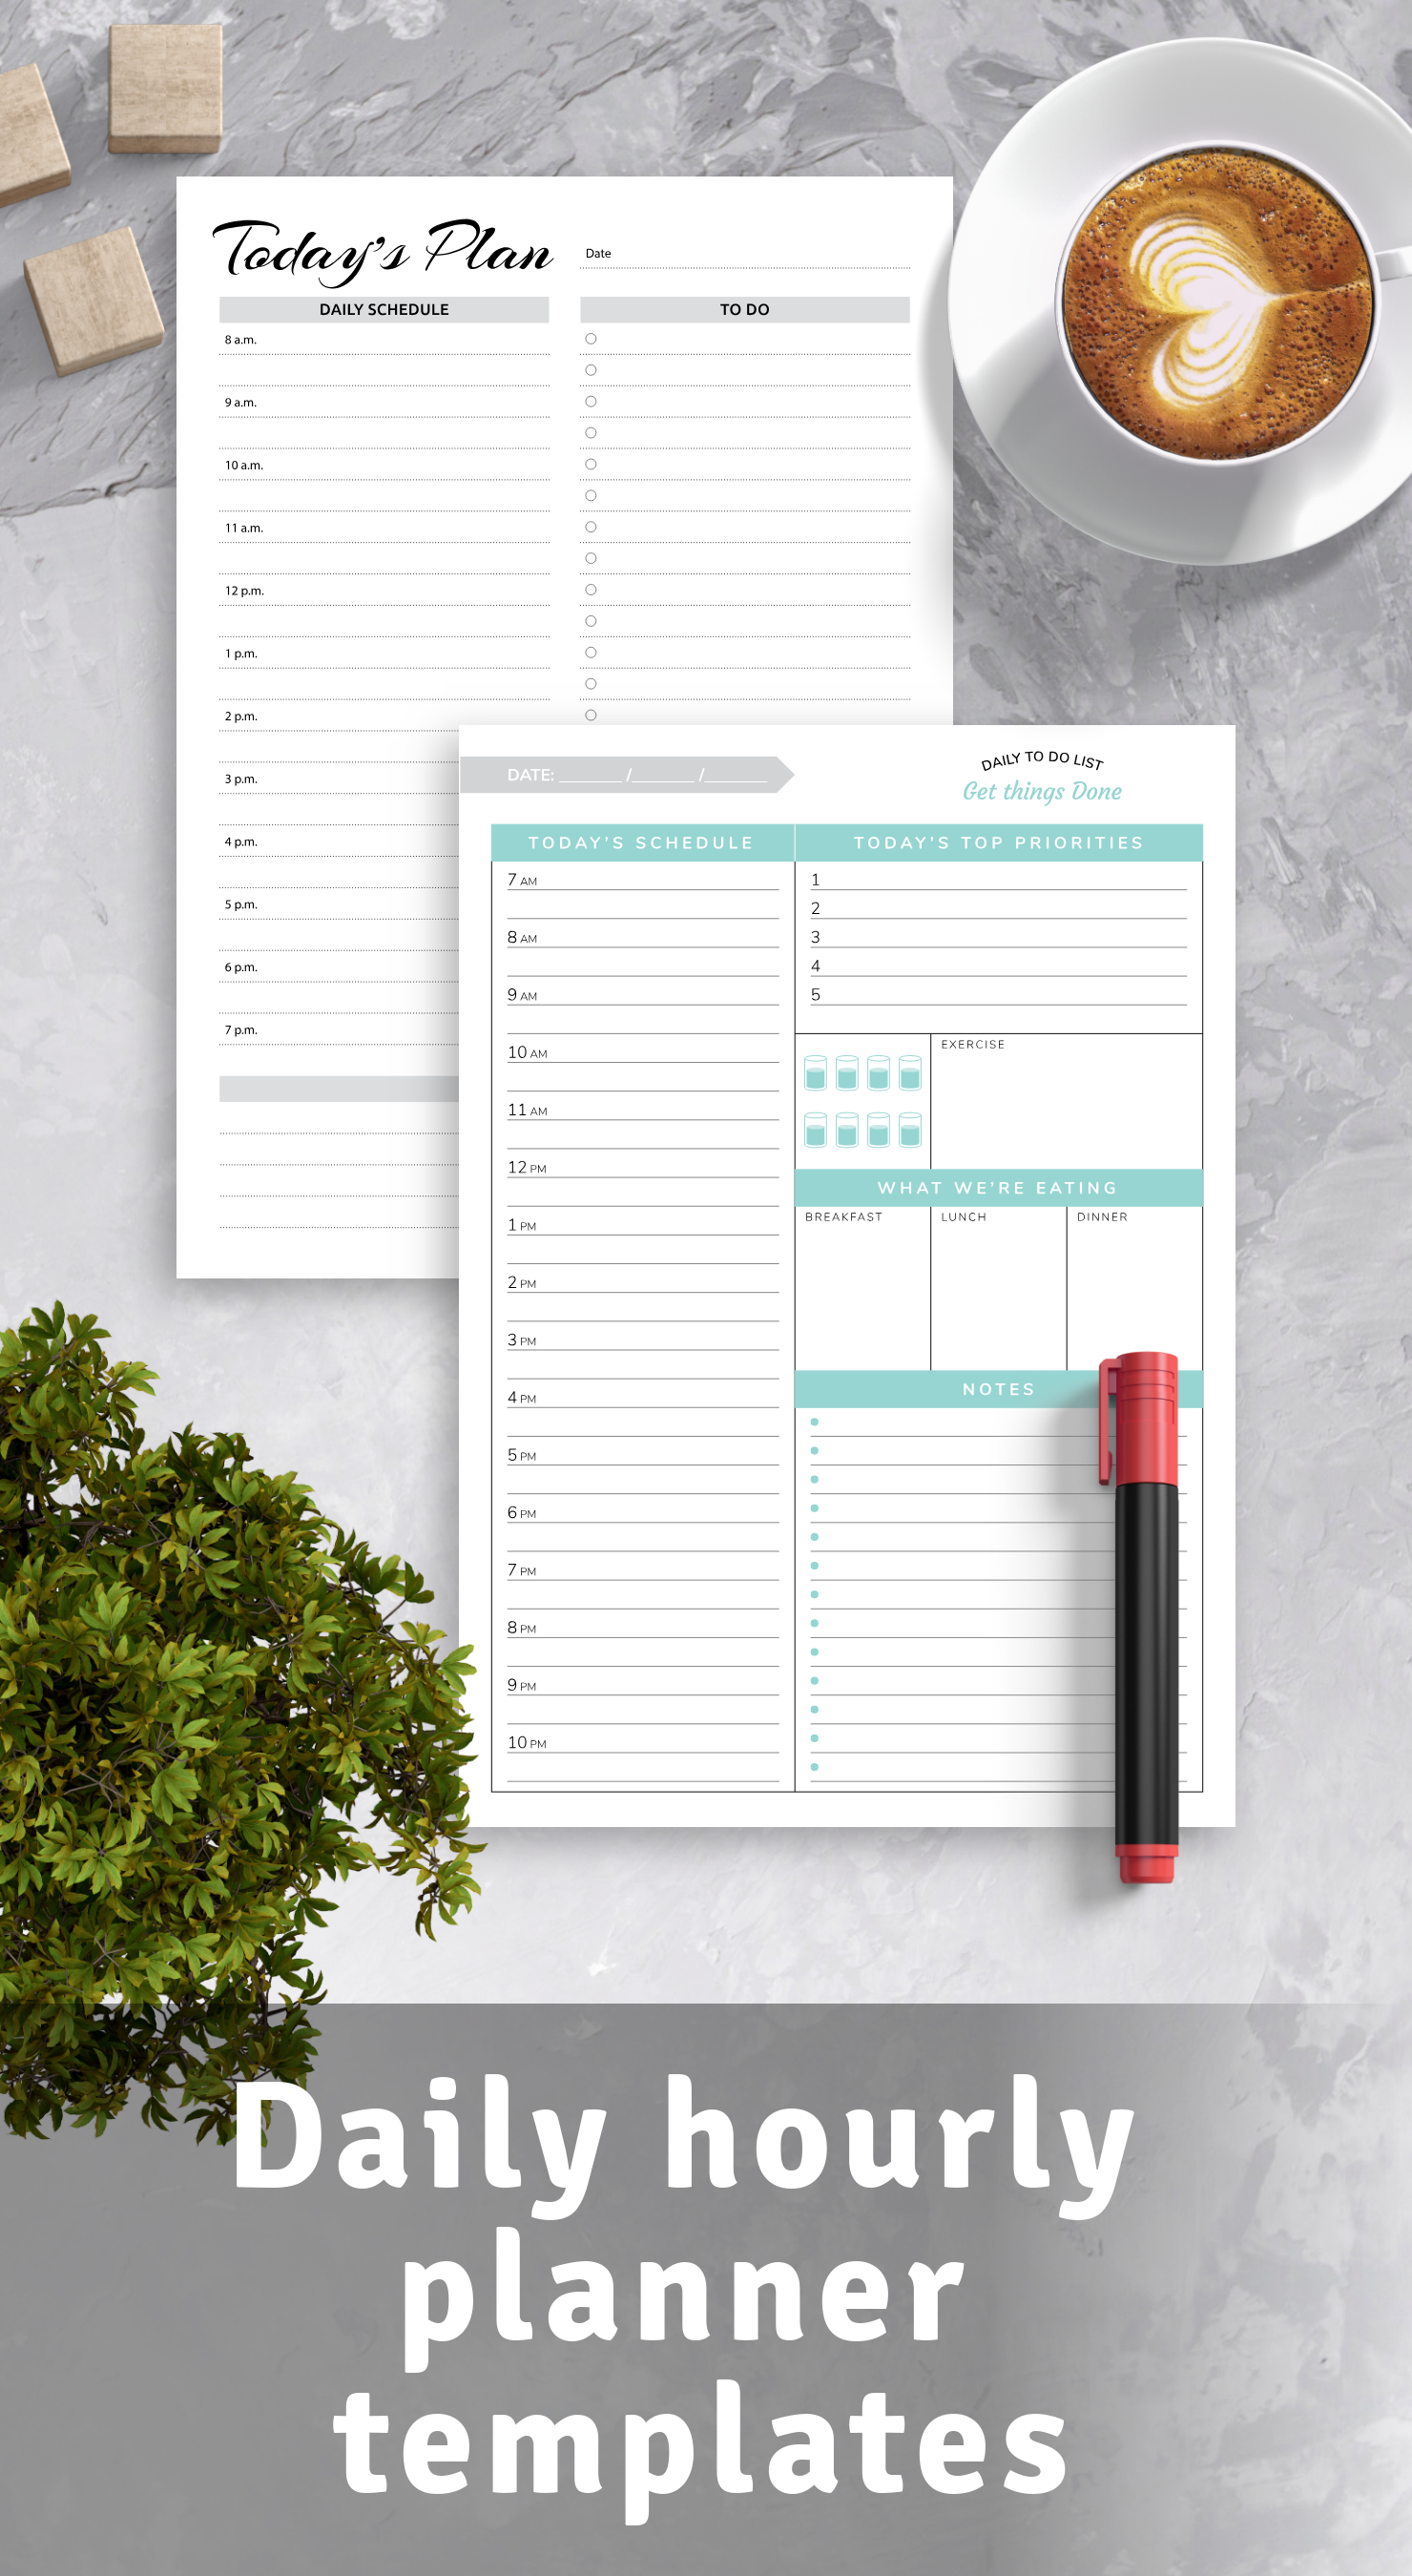 Daily hourly planner templates